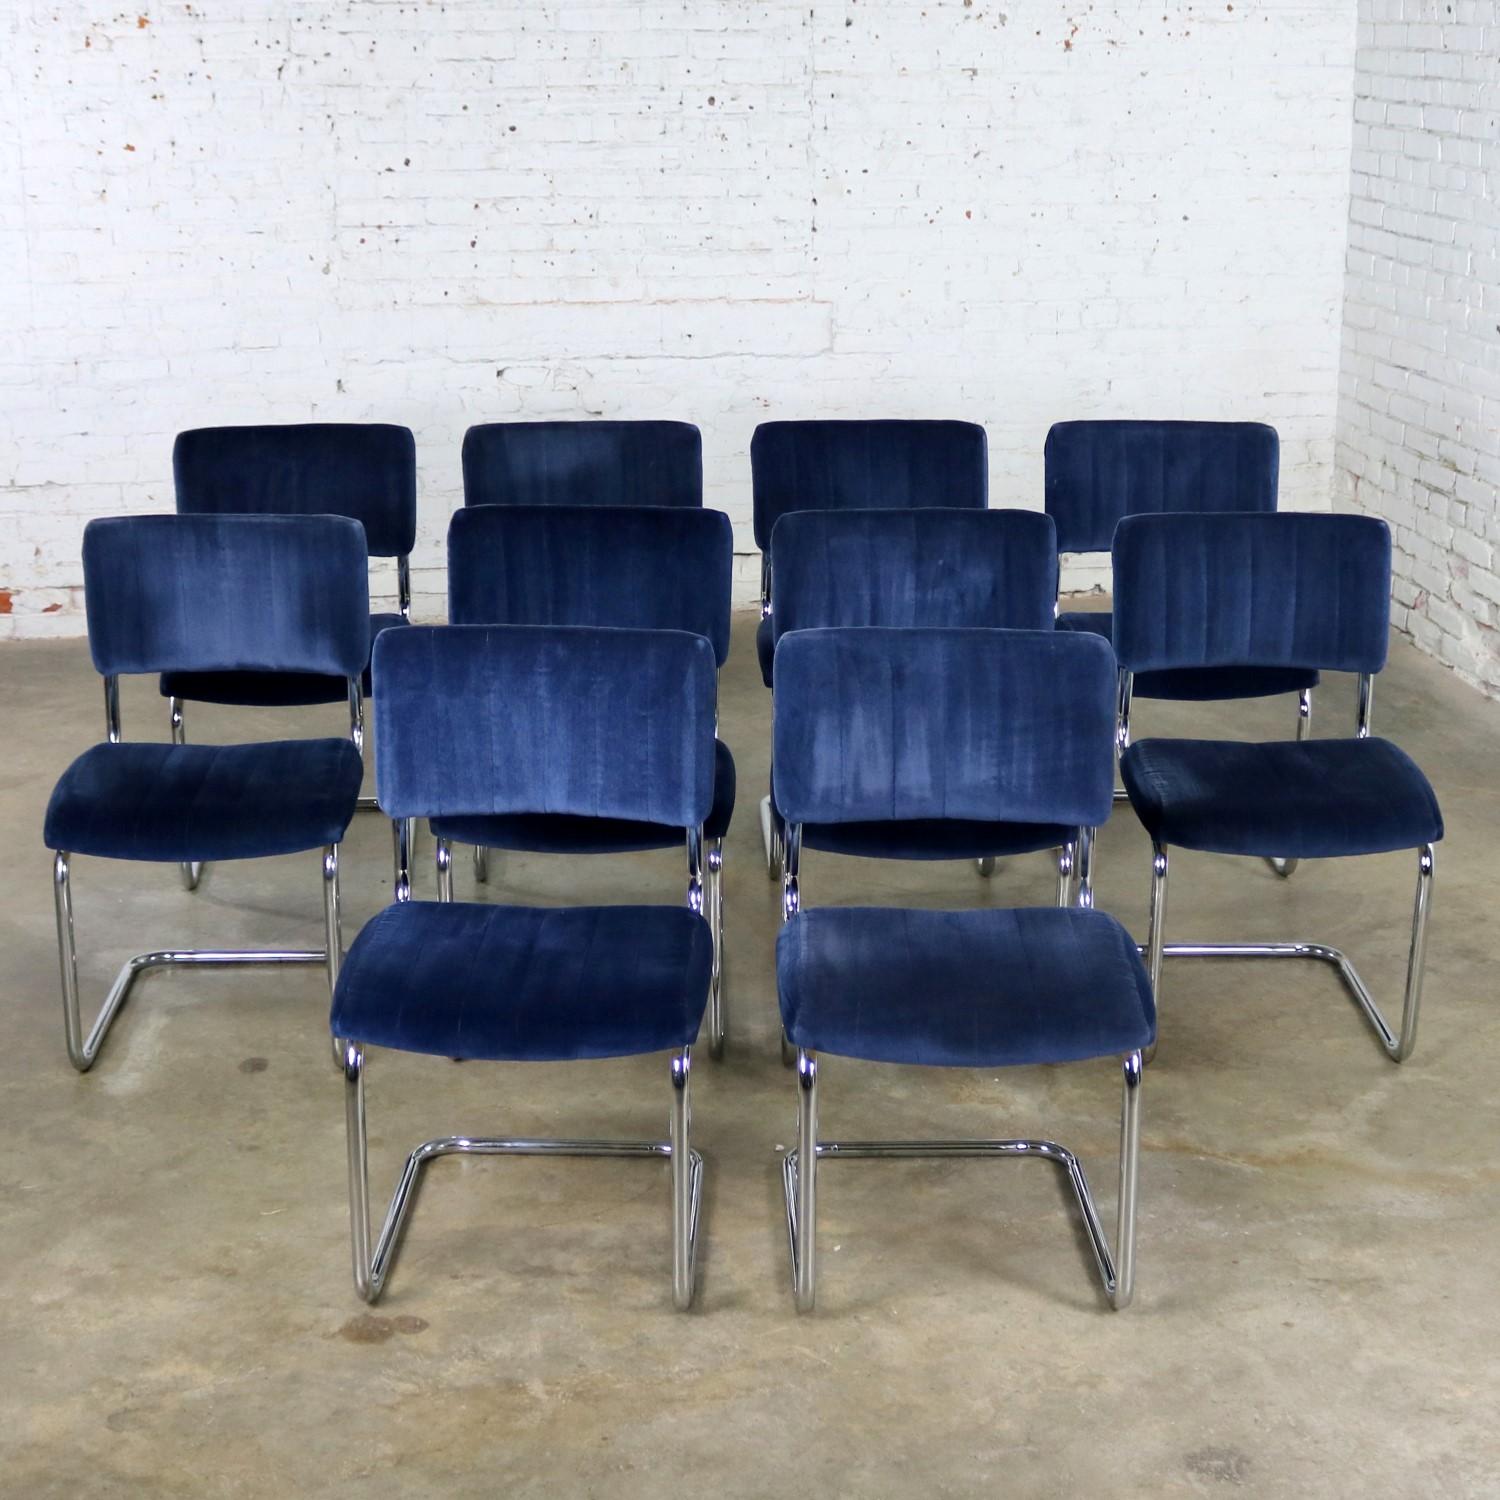 Wonderful cantilevered chrome and light blue velvet dining chairs after the Cesca chair designed by Marcel Breuer in 1928. These chairs are made by Segars Tubular Products and all of the chairs are in wonderful vintage condition with normal wear for